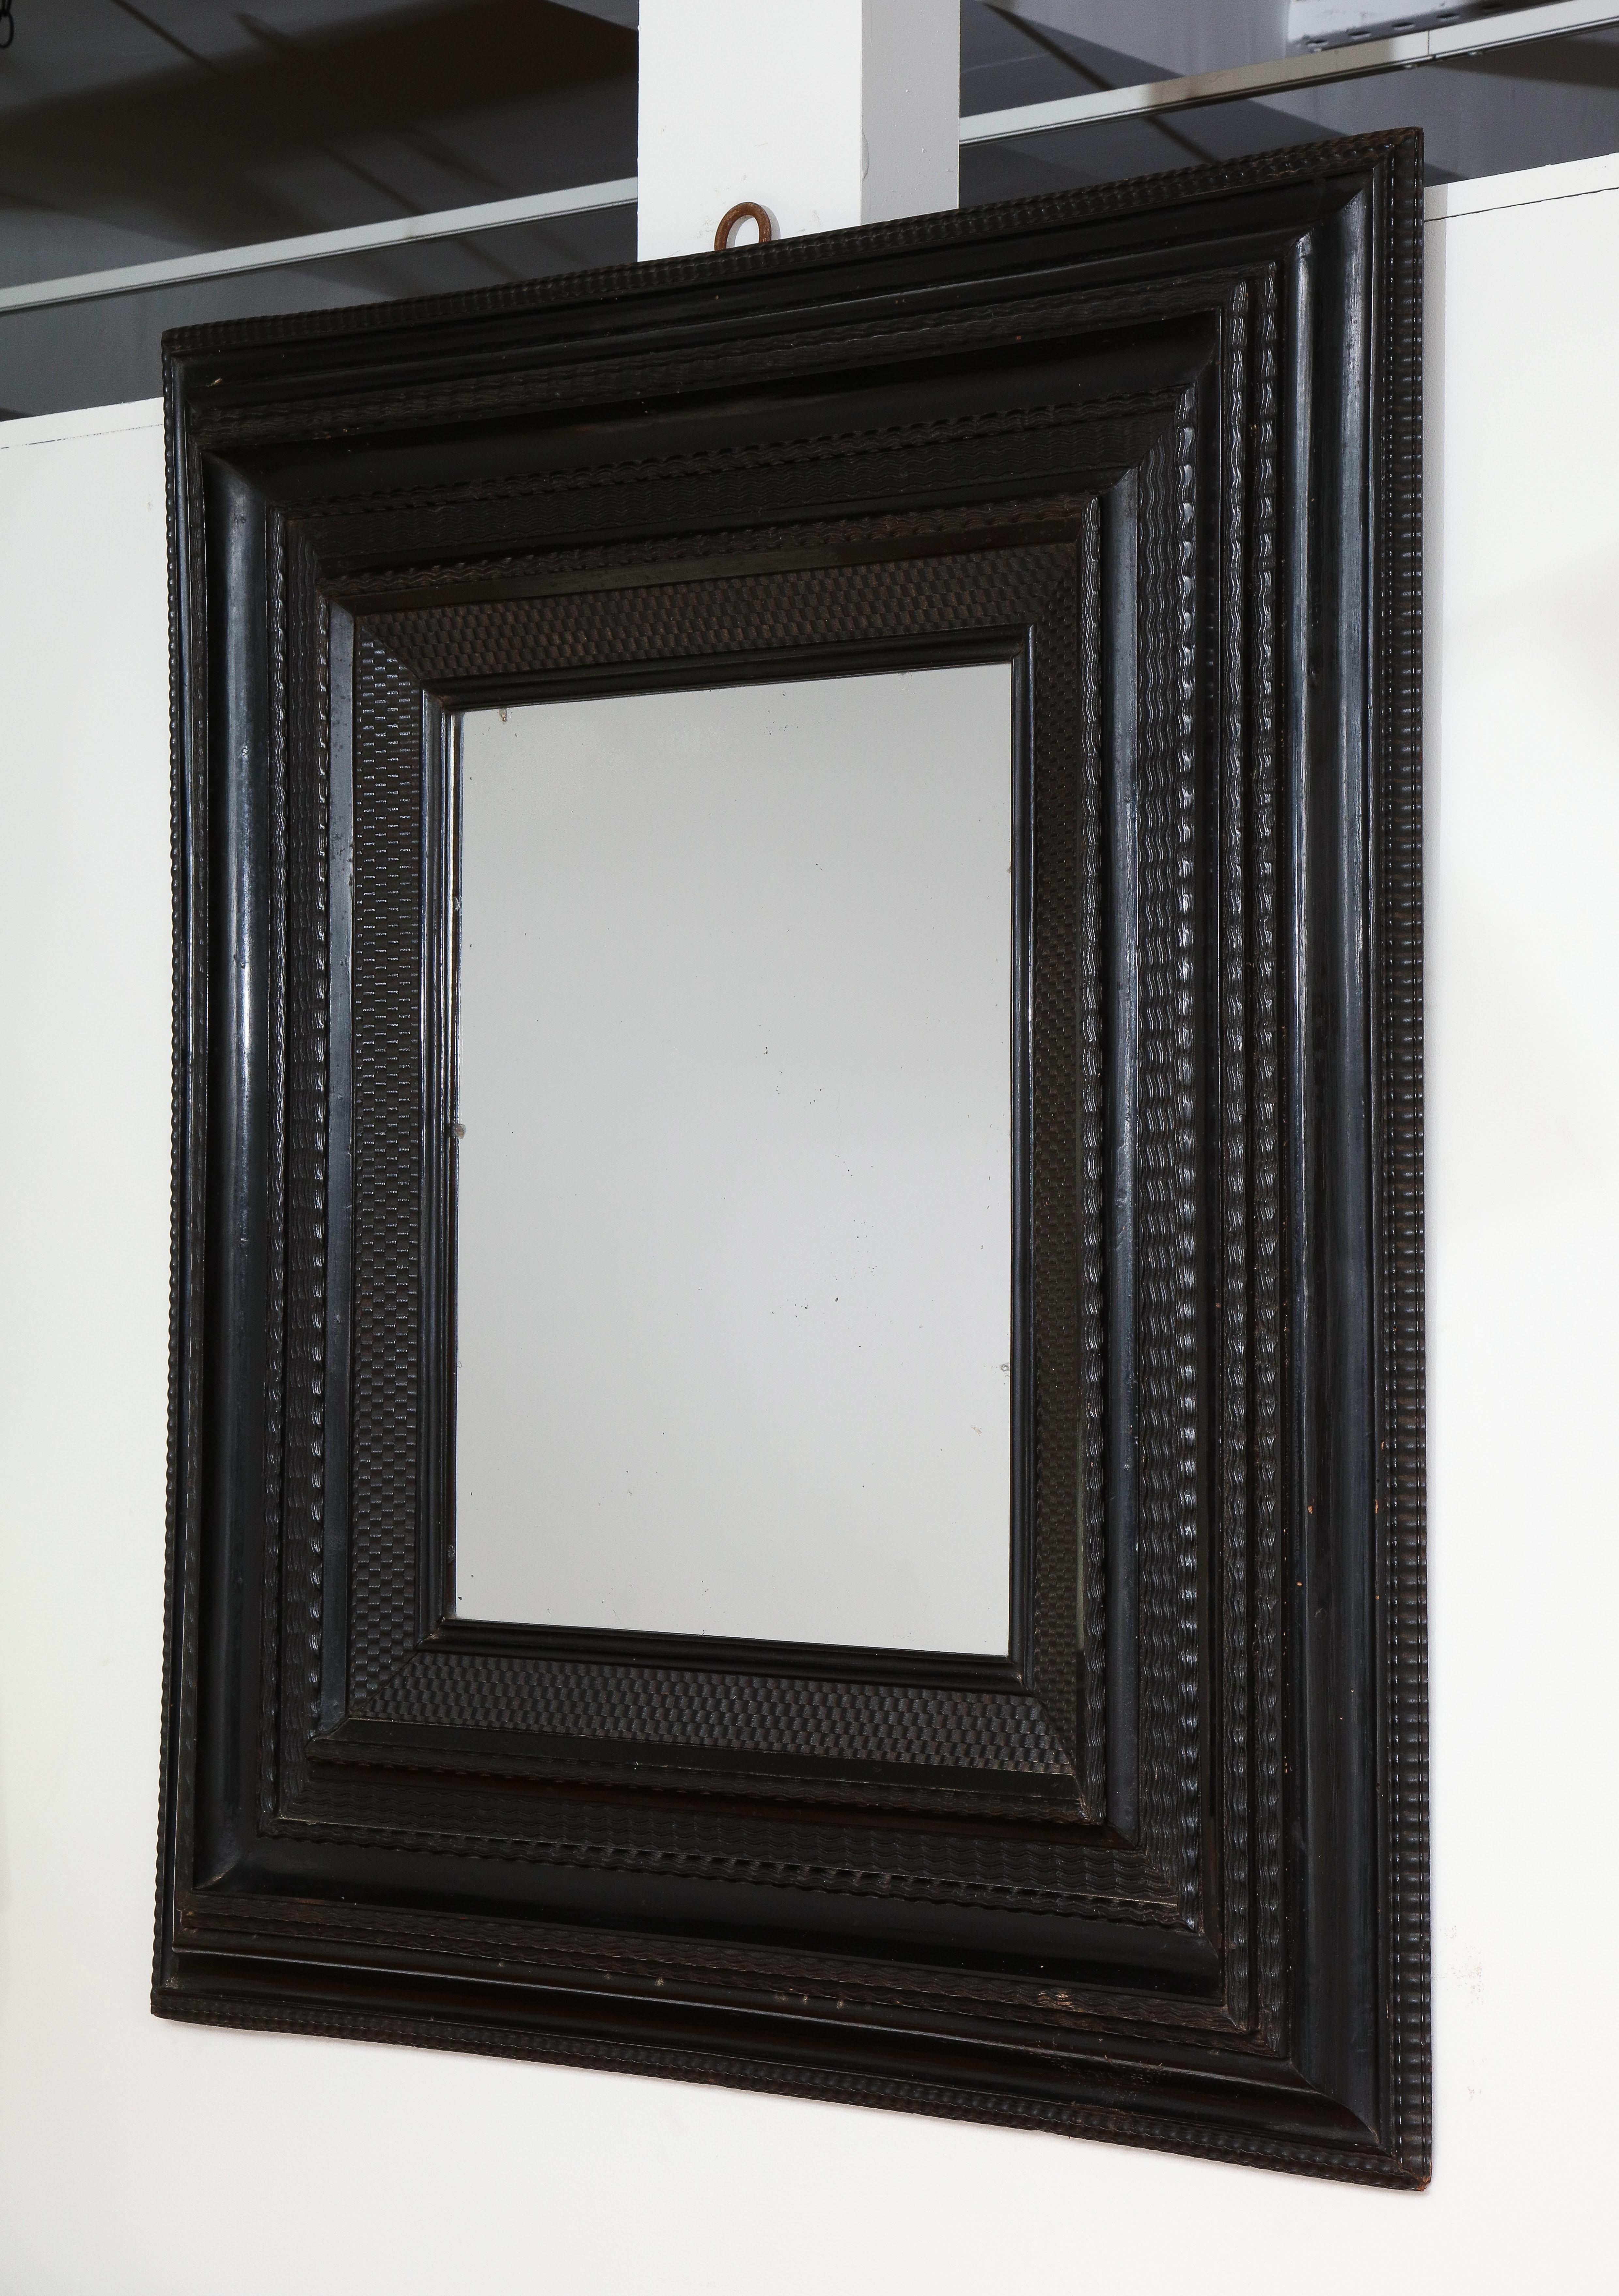 Late 18th C., early 19th C. Italian mirror
Ebonized walnut guilloche frame, old silvered glass mirror

Measures: 47 by 41.75 inches.